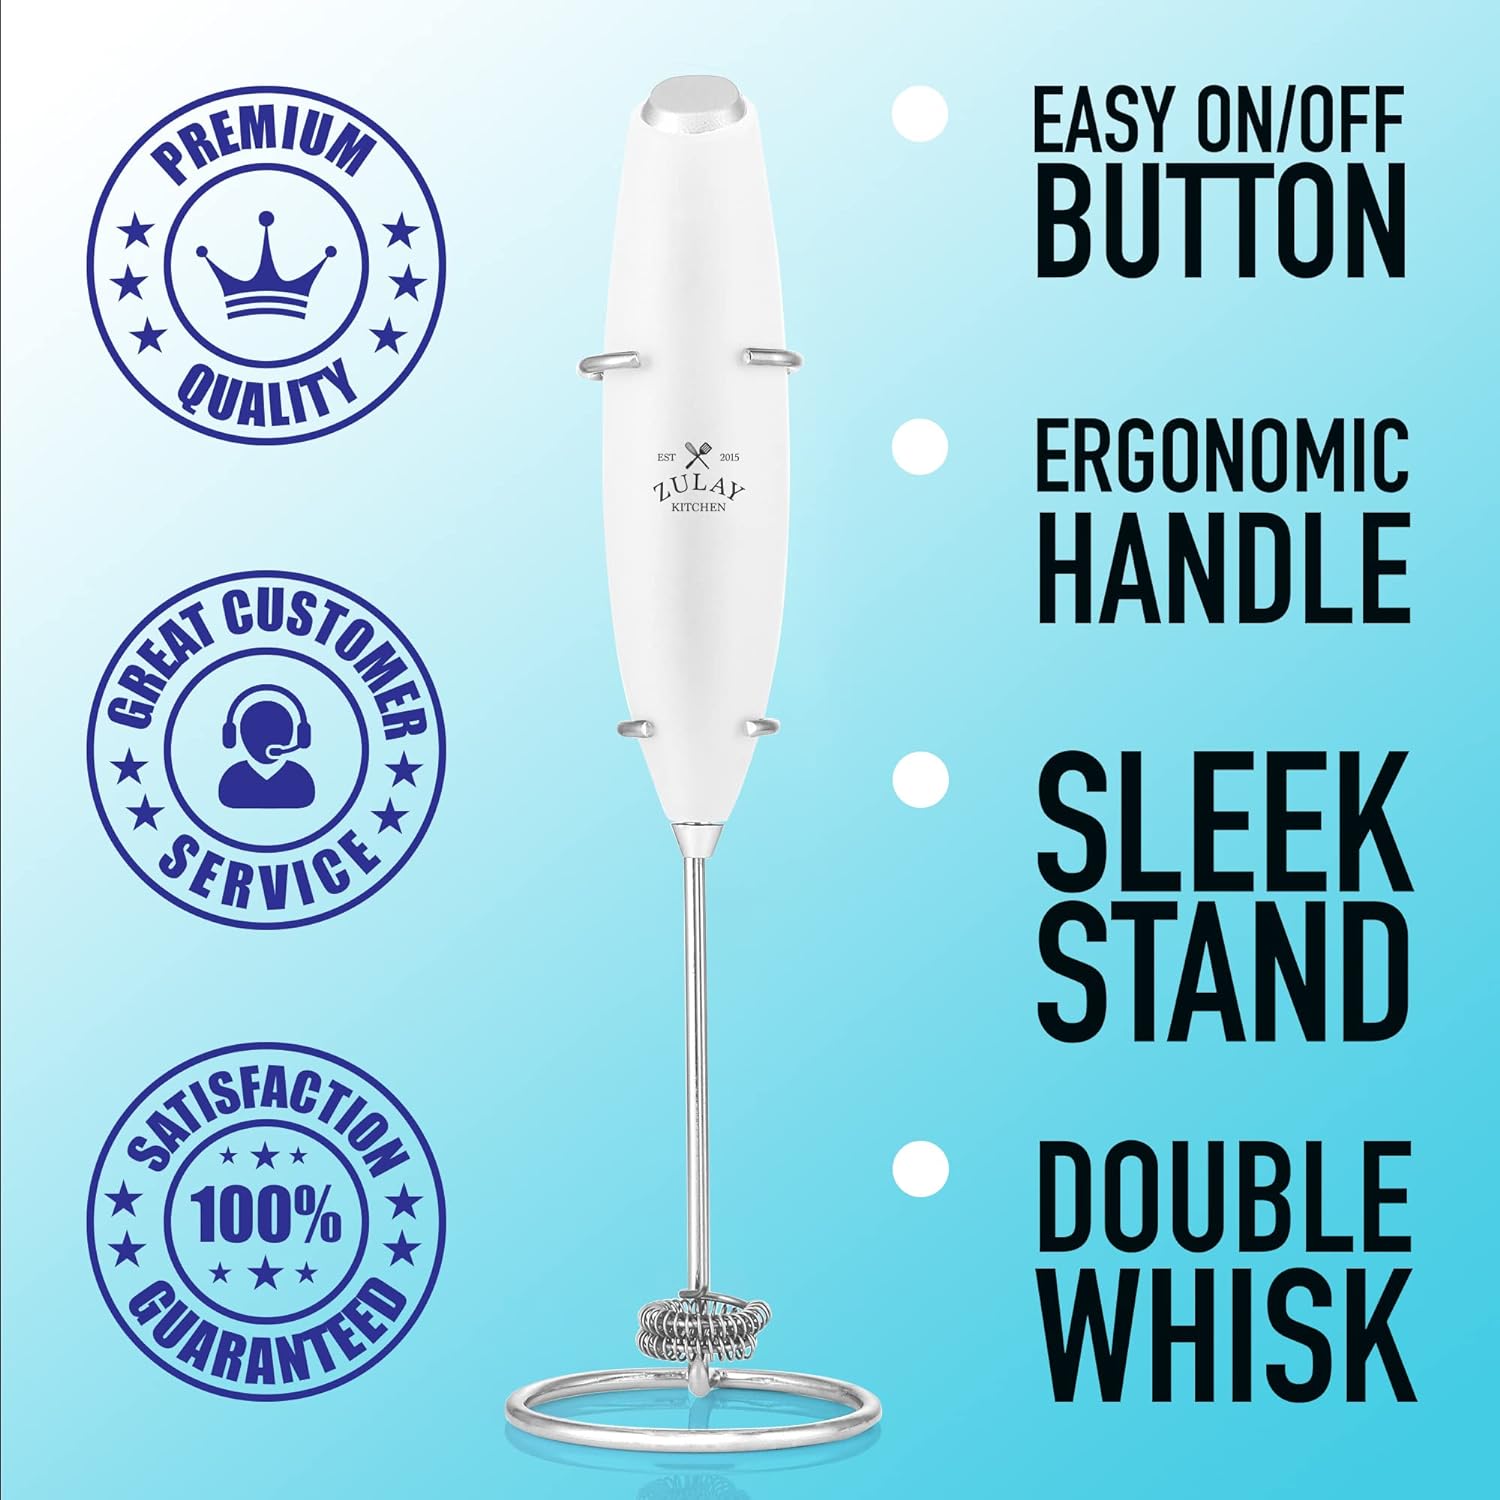 Premium quality Double Whisk Milk Frother